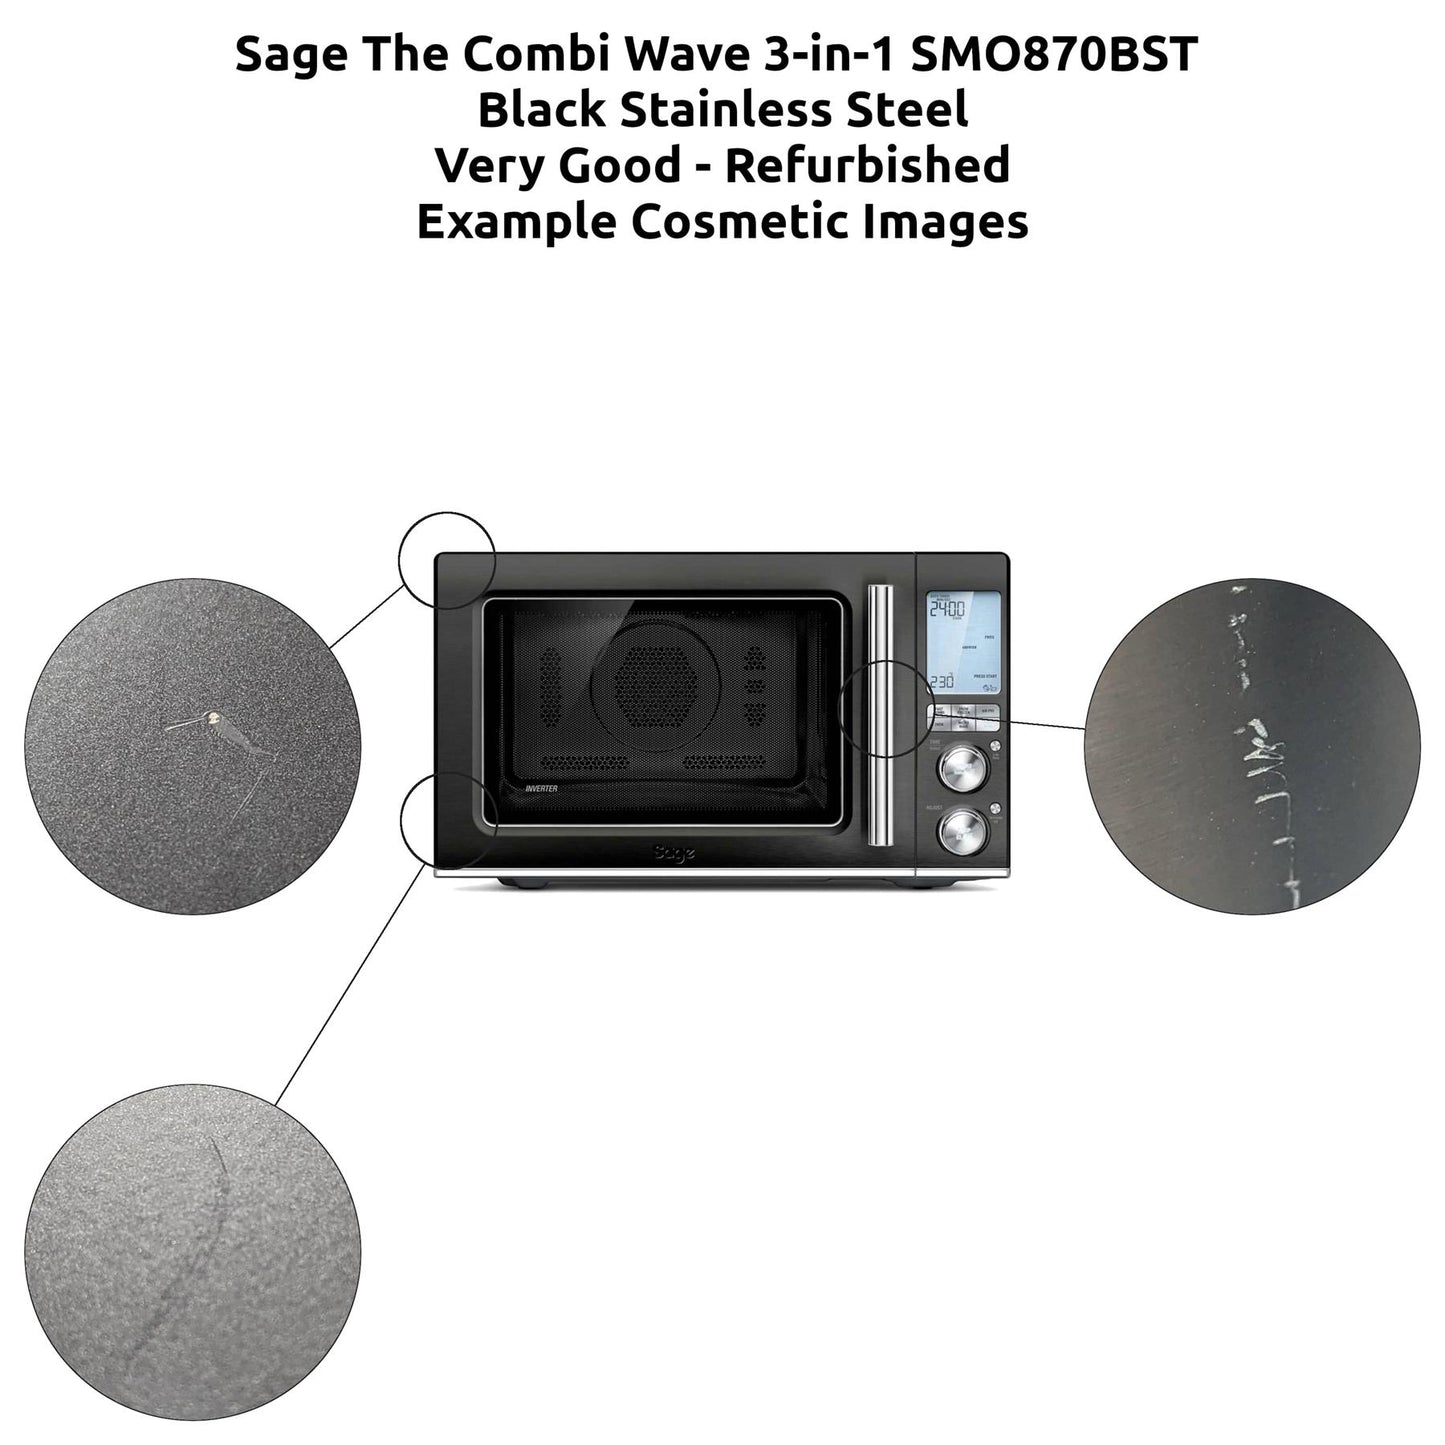 Sage The Combi Wave 3-in-1 SMO870 Air Fryer Oven Microwave